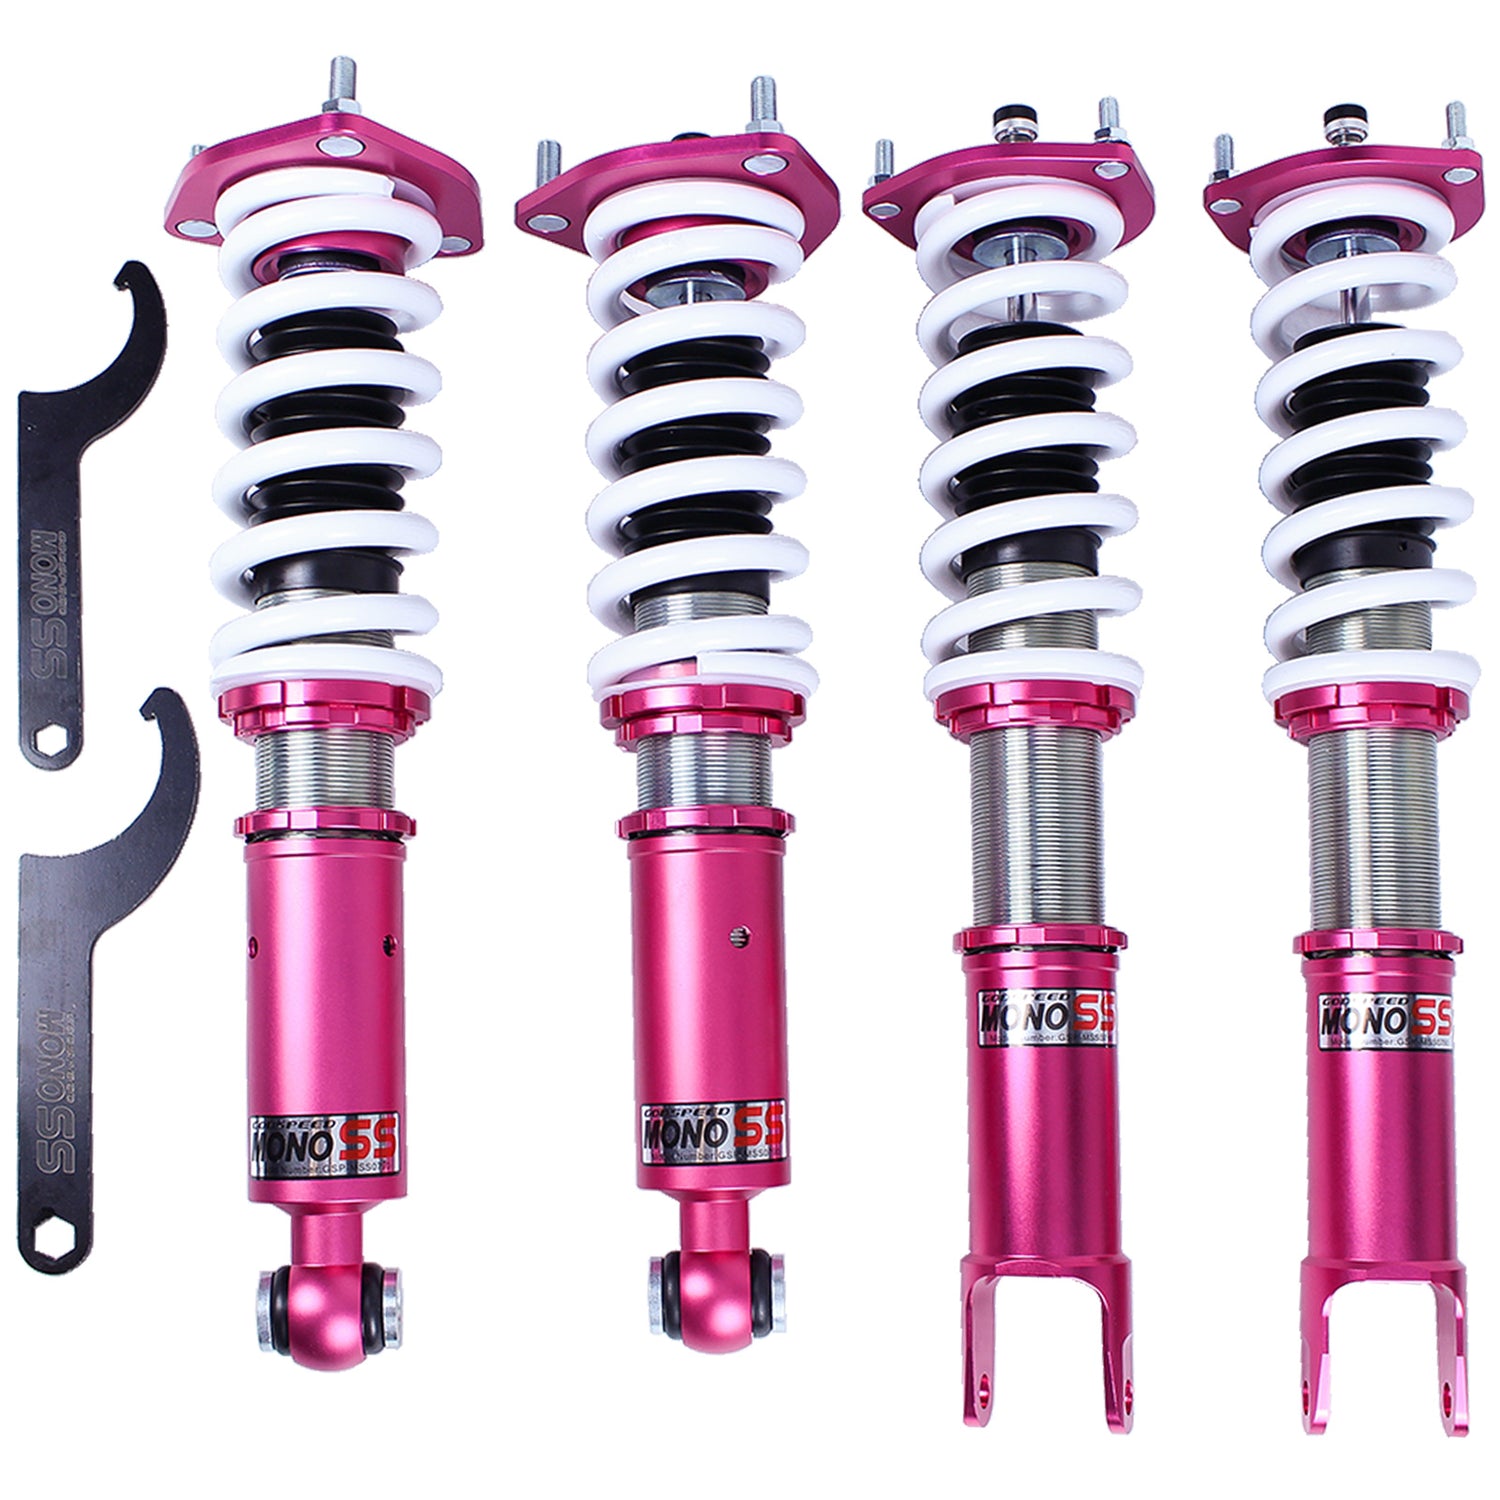 Godspeed MSS0790 MonoSS Coilover Lowering Kit, Fully Adjustable, Ride Height, Spring Tension And 16 Click Damping, Lexus GS300(JZS147) 1991-97